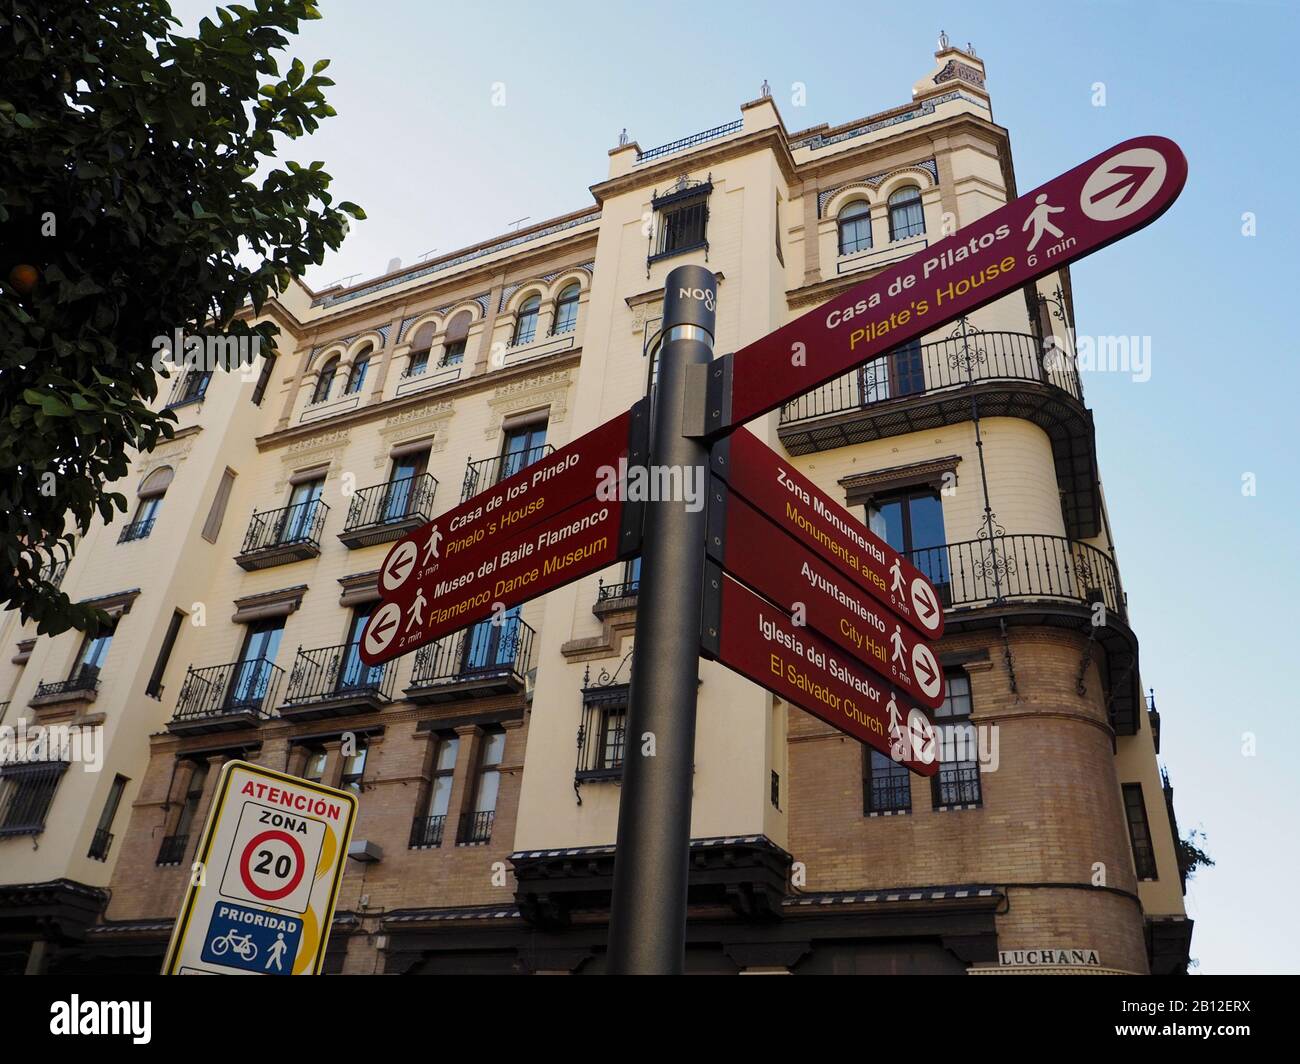 Tourism walking routes sign in Sevilla, Andalucia, Spain Stock Photo